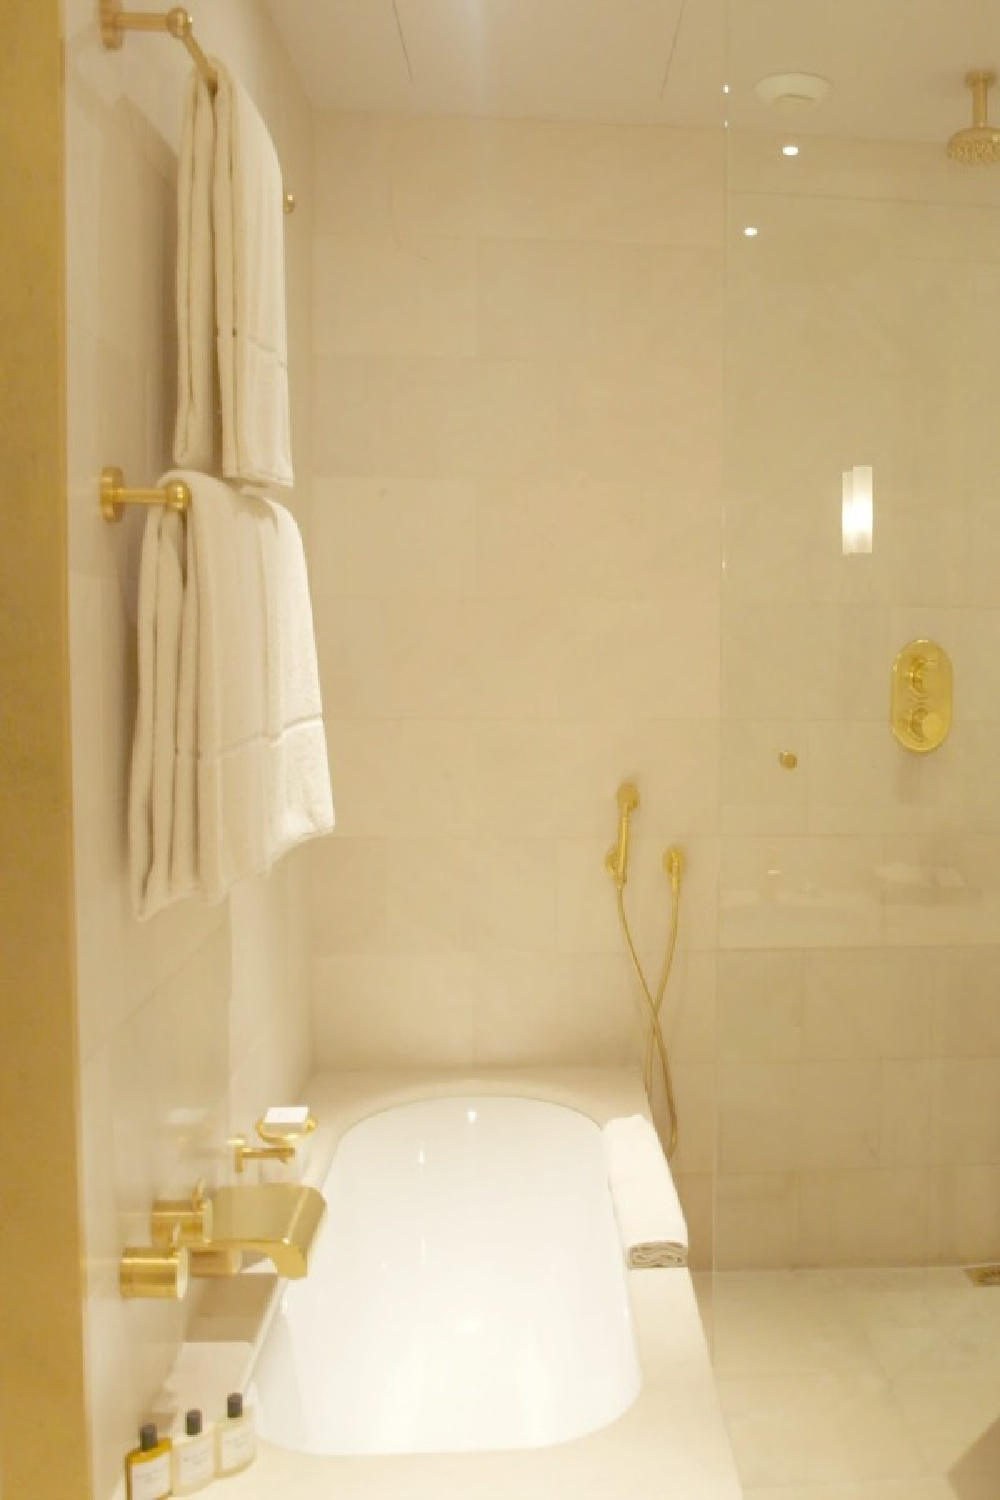 Creamy marble and gold hardware in a luxurious bathroom in our suite ata the Park Hyatt Paris Vendome - Hello Lovely Studio.